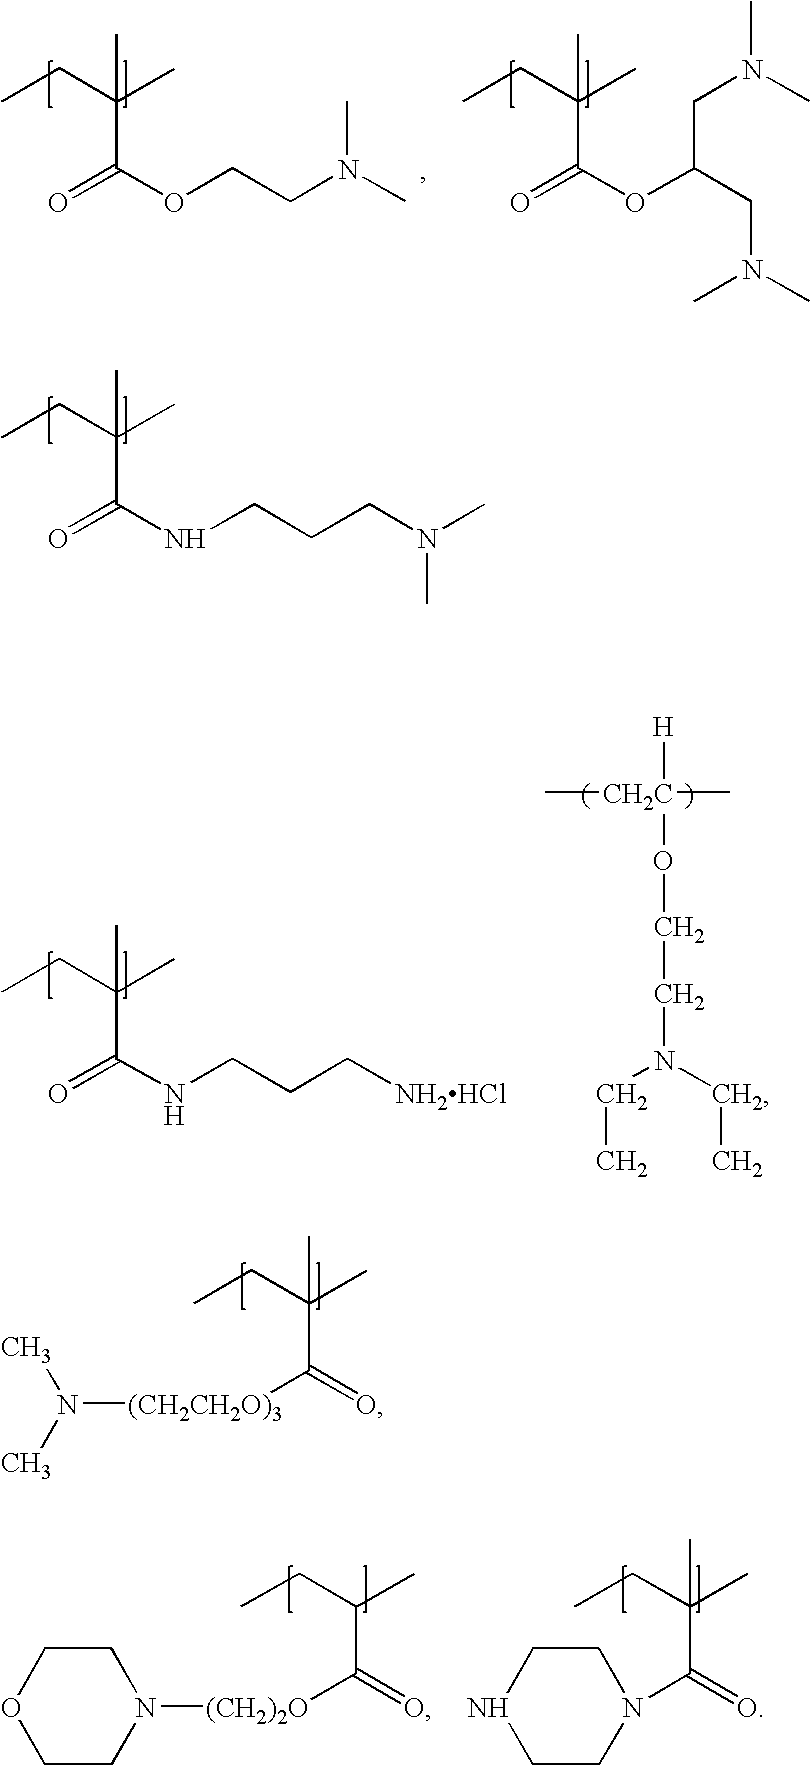 Block polymers, compositions and methods of use for foams, laundry detergents, shower rinses and coagulants